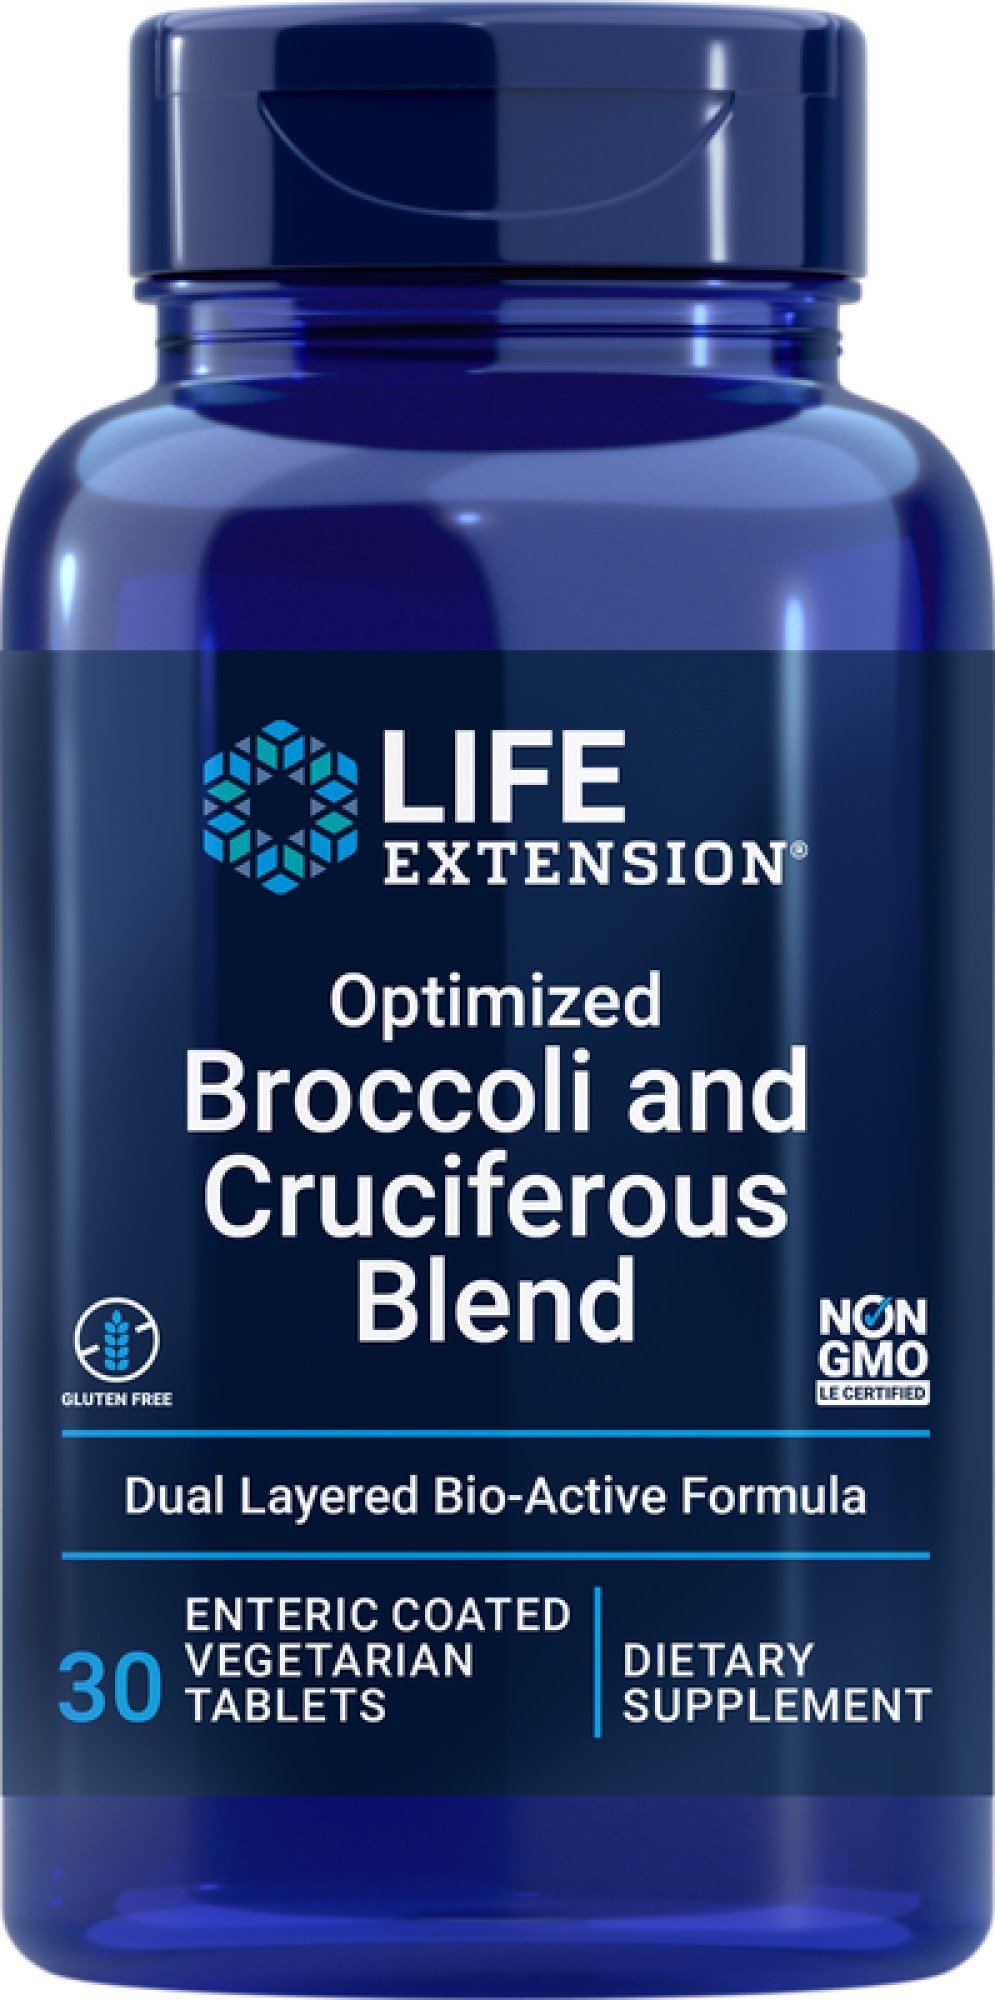 Life Extension Optimized Broccoli and Cruciferous Blend 30 Enteric Coated Tablet